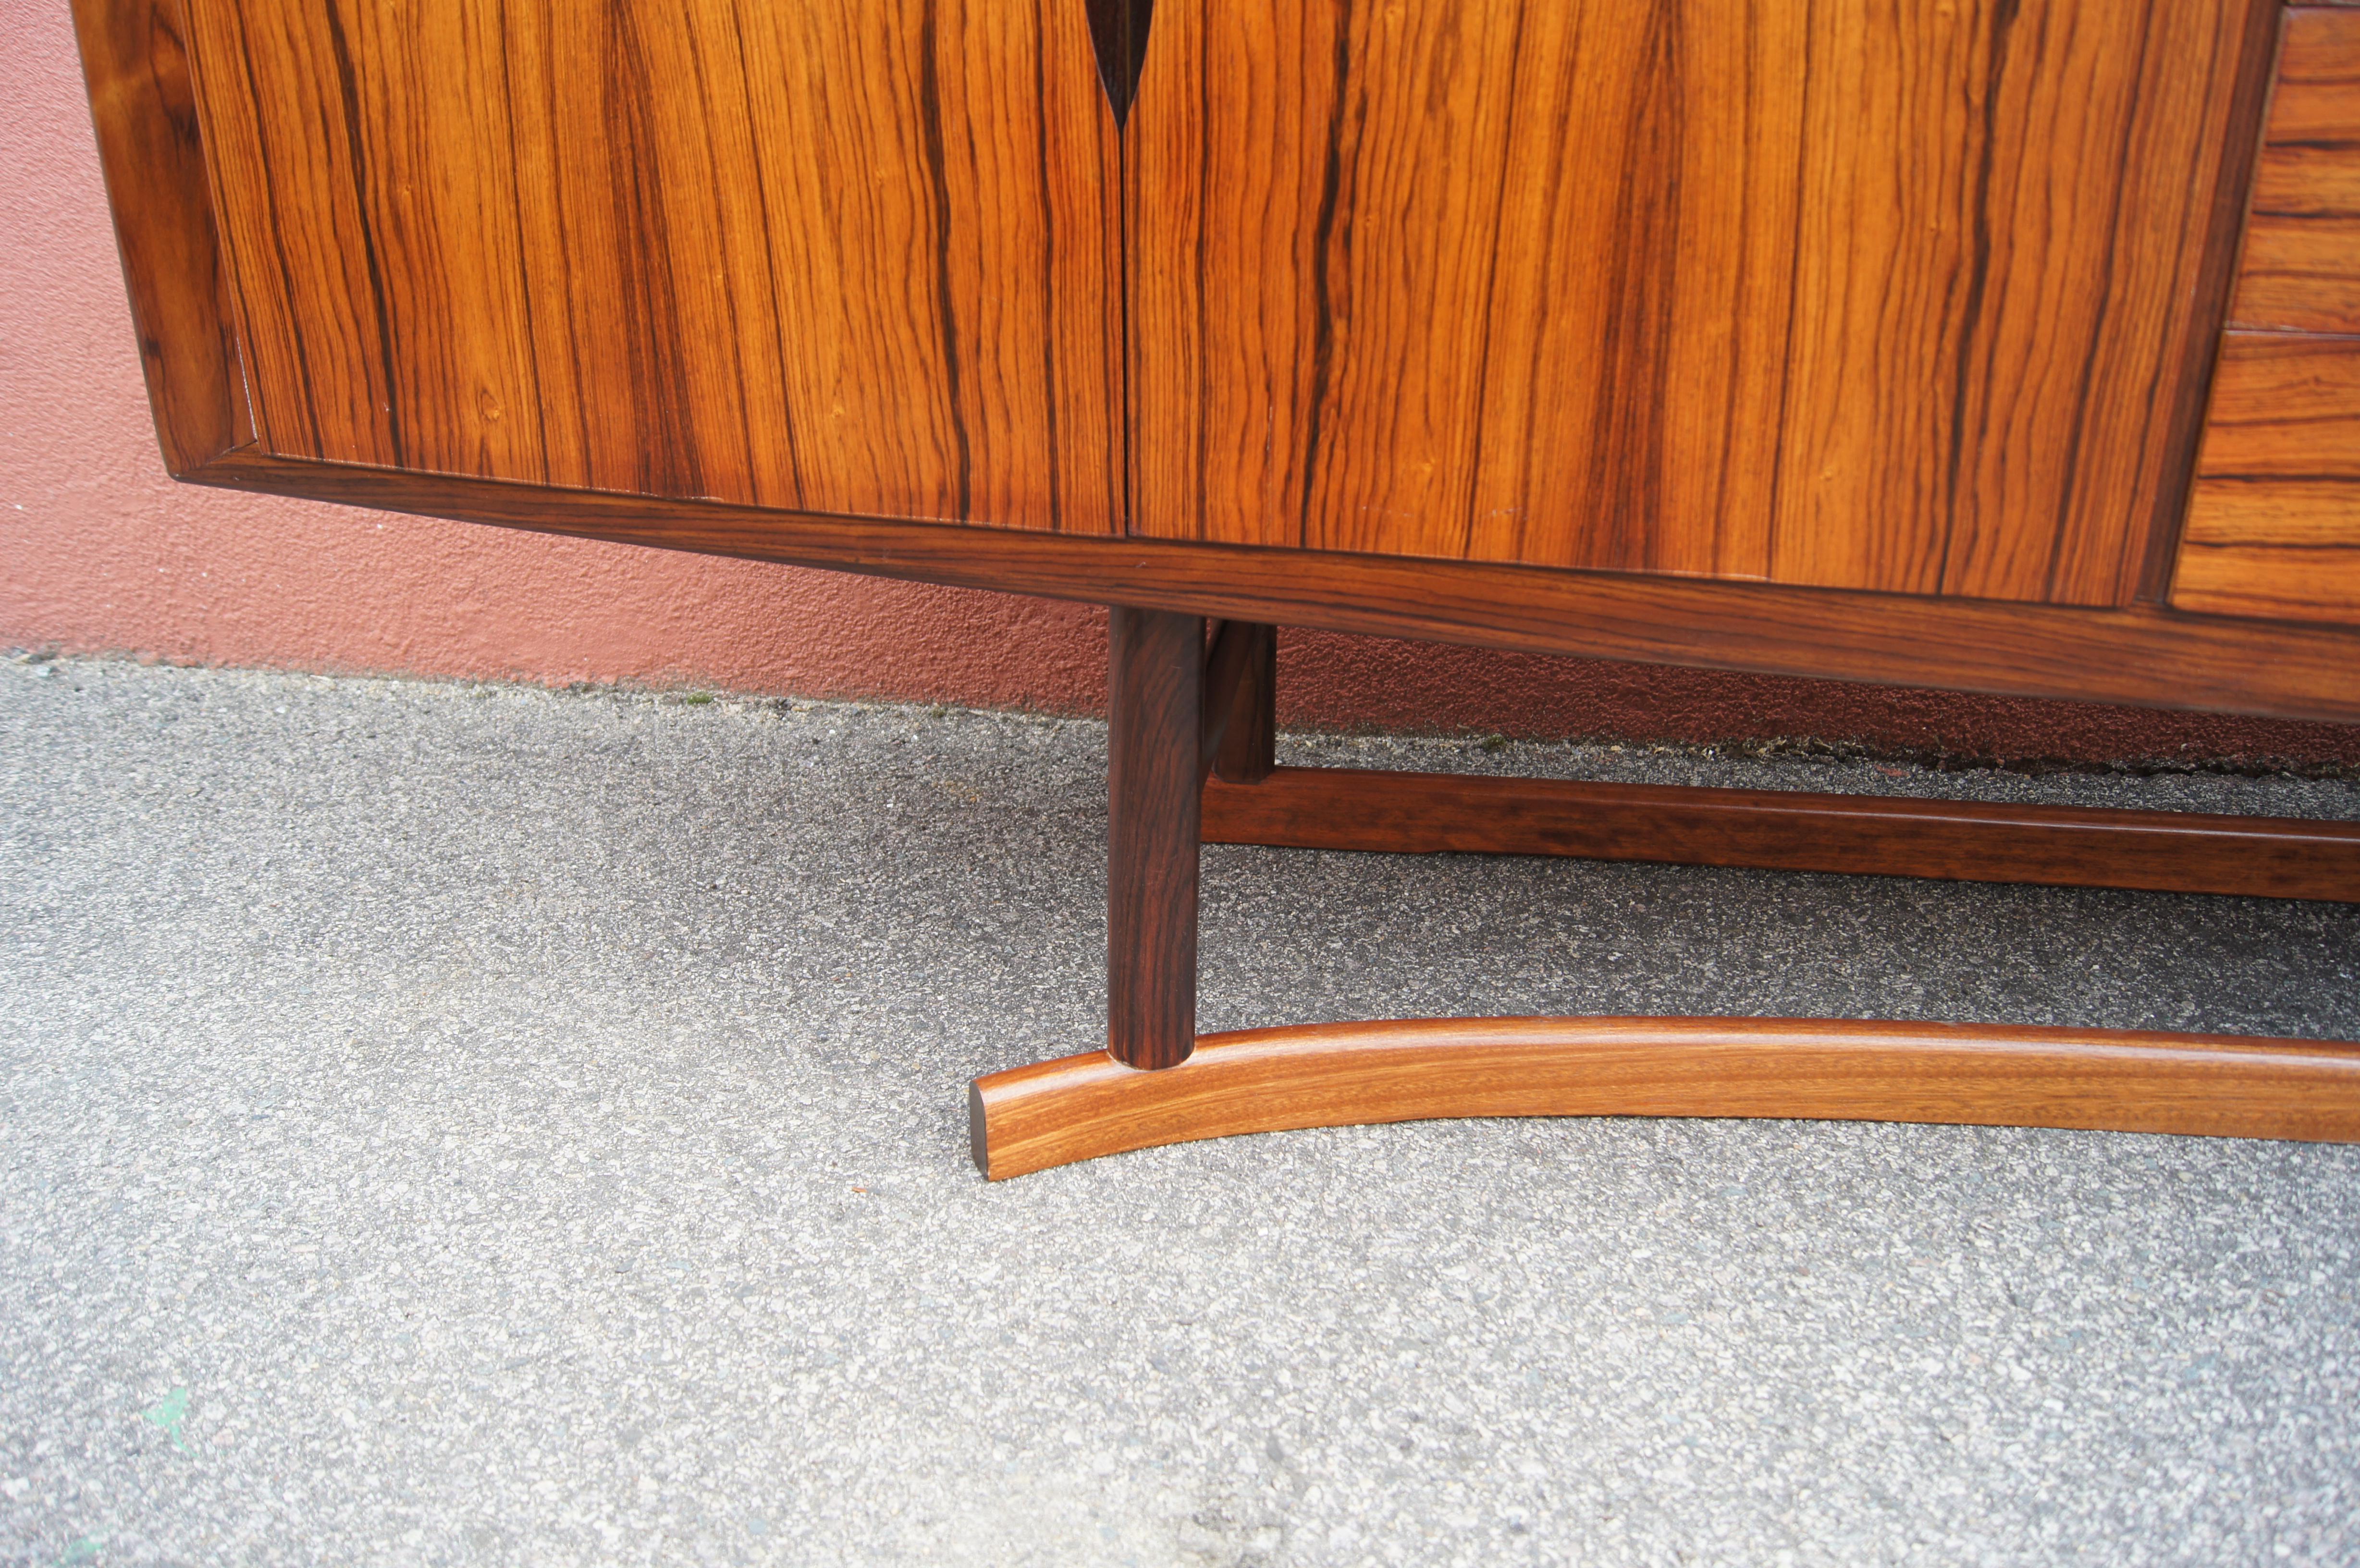 Mid-20th Century Rosewood Sideboard, Model HB20, by Johannes Andersen for Hans Bech